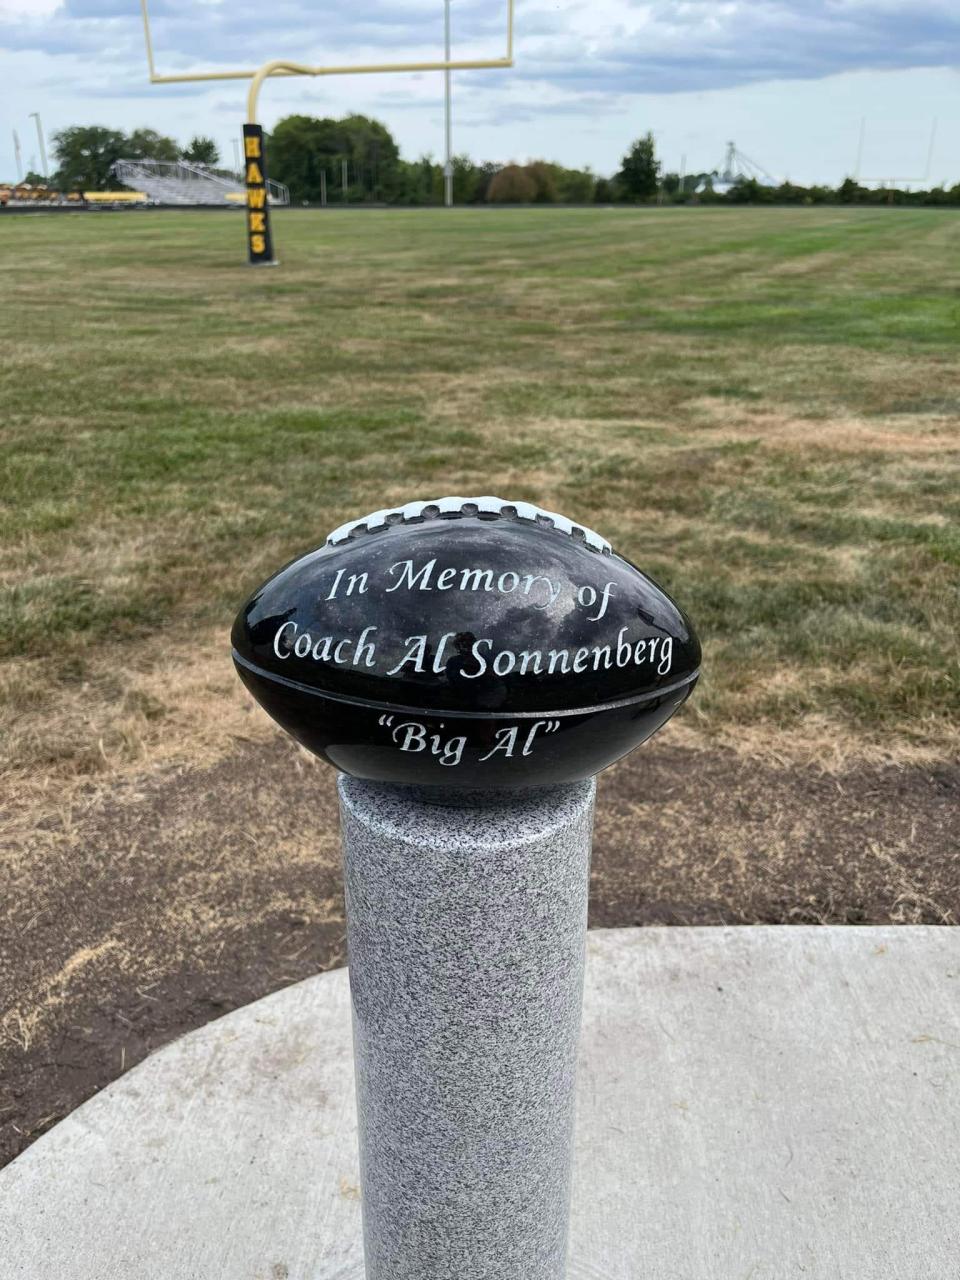 A monument near the north end zone honors the memory of longtime Central Lee coach Al Sonnenberg.